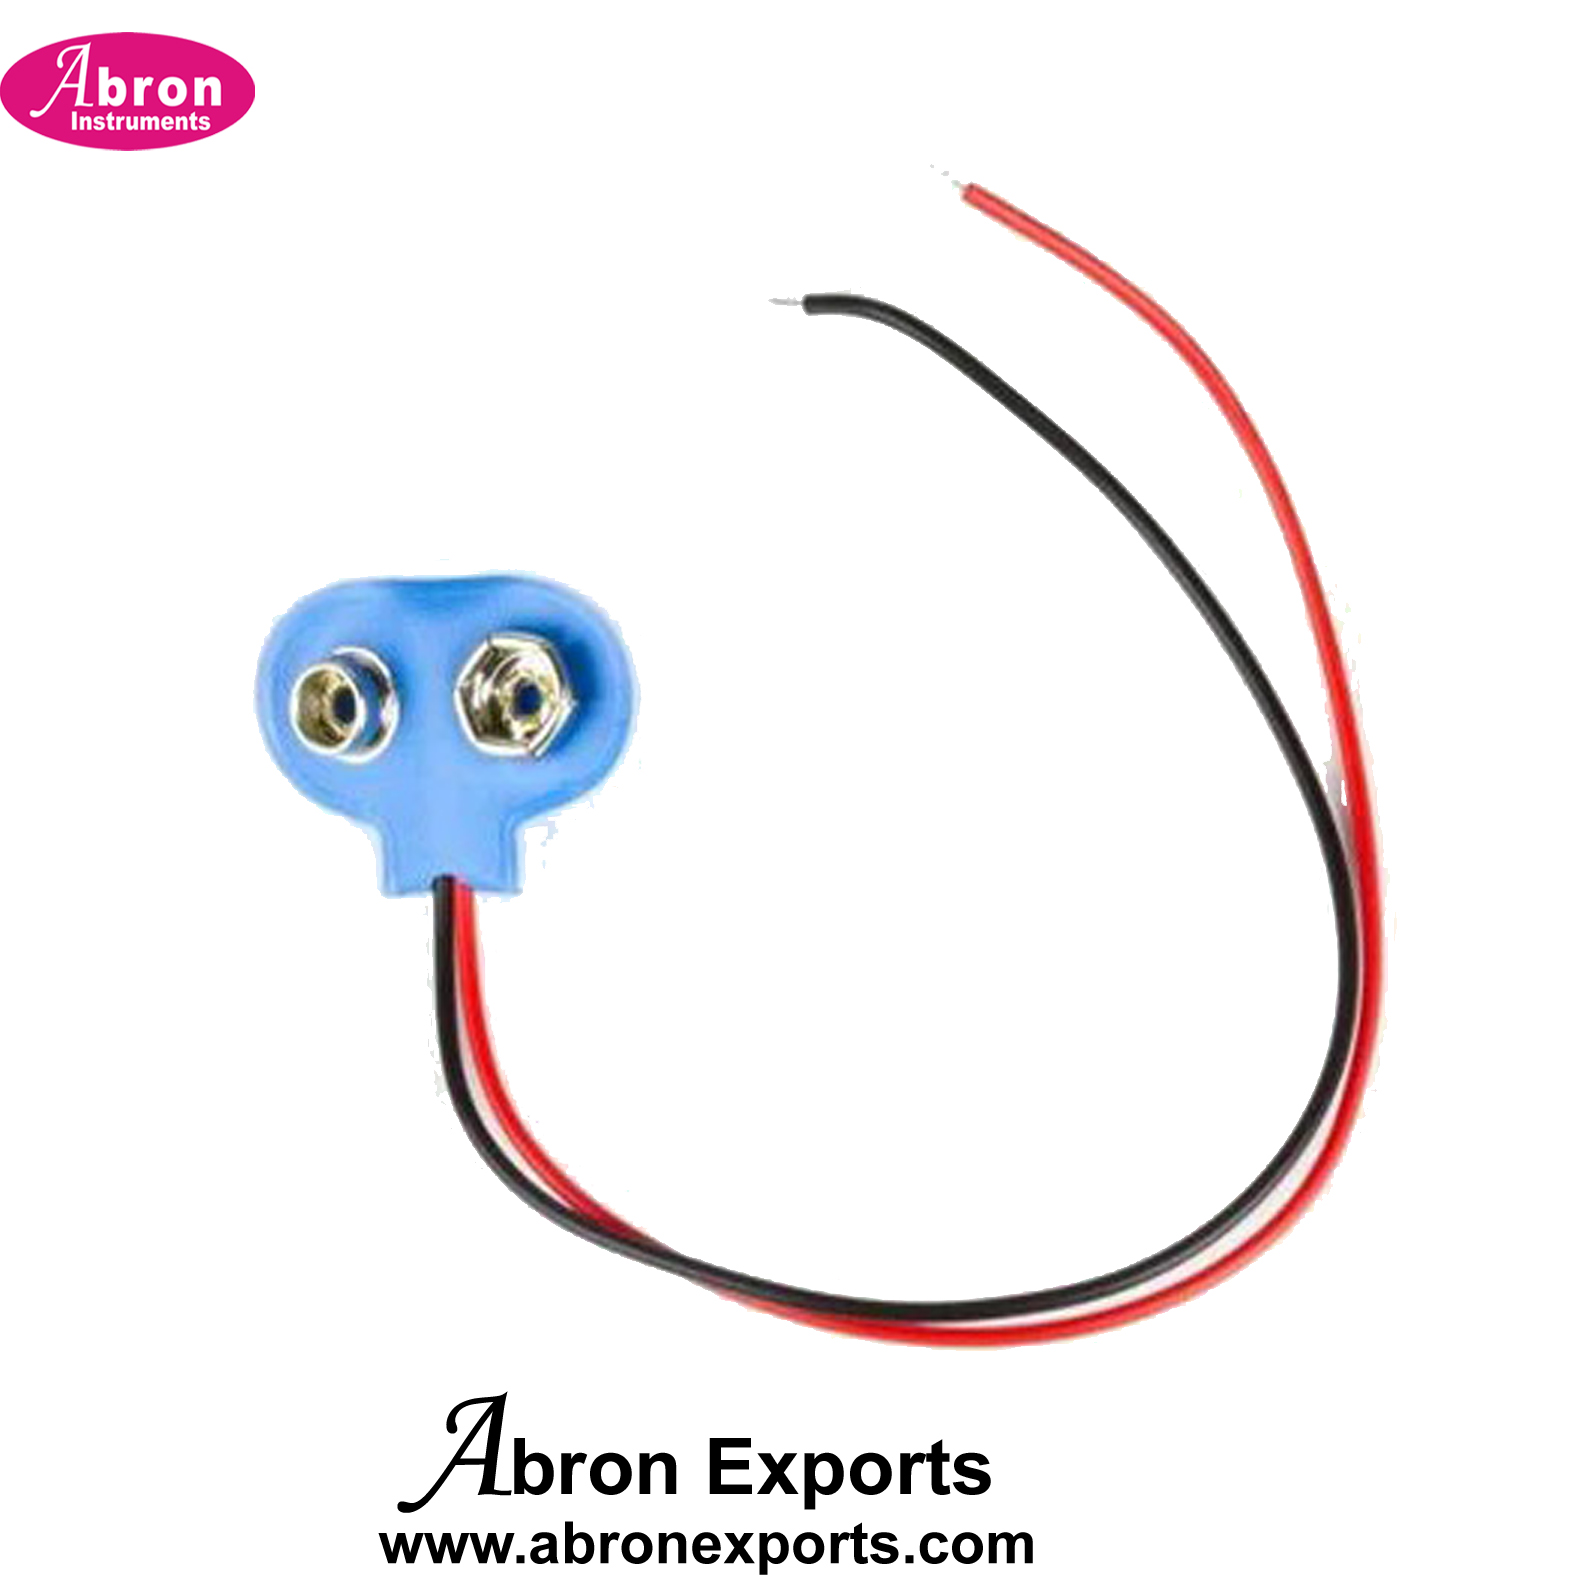 Electronic Component loose spare Battery clip 9V with wire snap connector 100pc pack Abron AE-1224B9V 